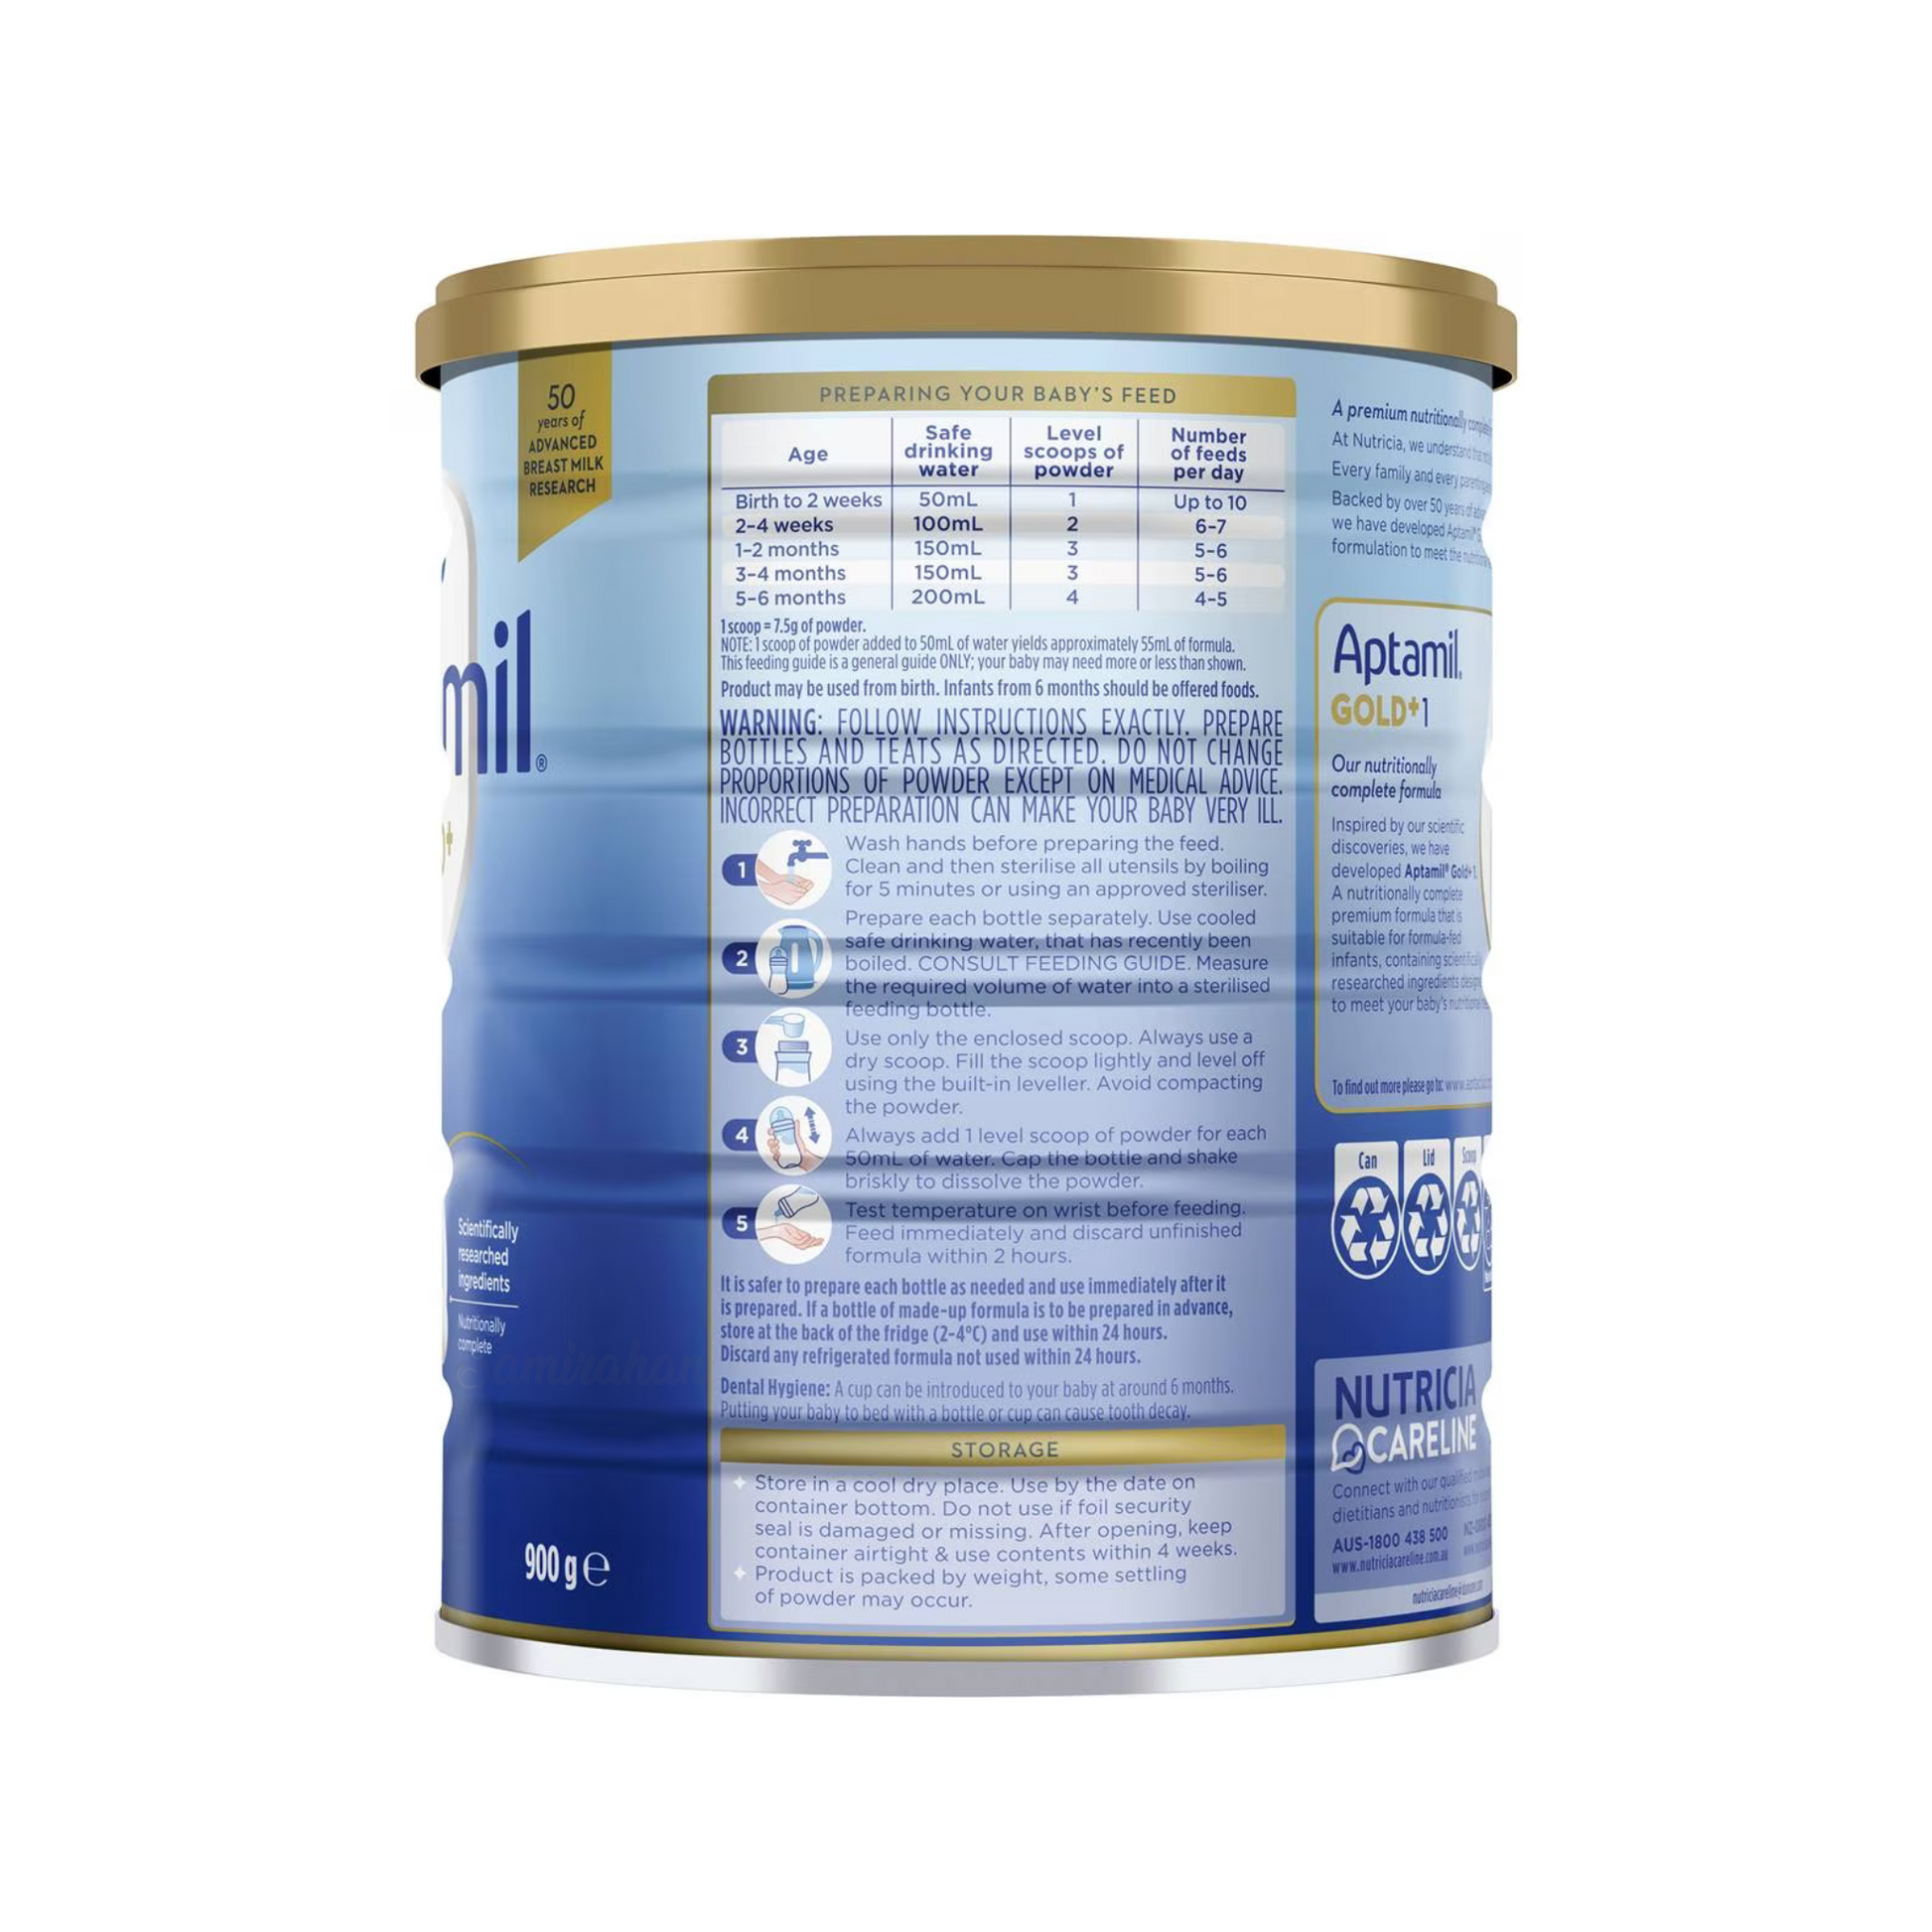 Aptamil Gold+ 1 Baby Infant Formula From Birth To 6 Months is a nutritionally complete premium baby milk formula, suitable for infants from birth to 6 months. Halal & vegetarian suitable. Best genuine real authentic Australian New Zealand cow quality safe healthy feeding food powder cheap price in Dhaka Bangladesh.